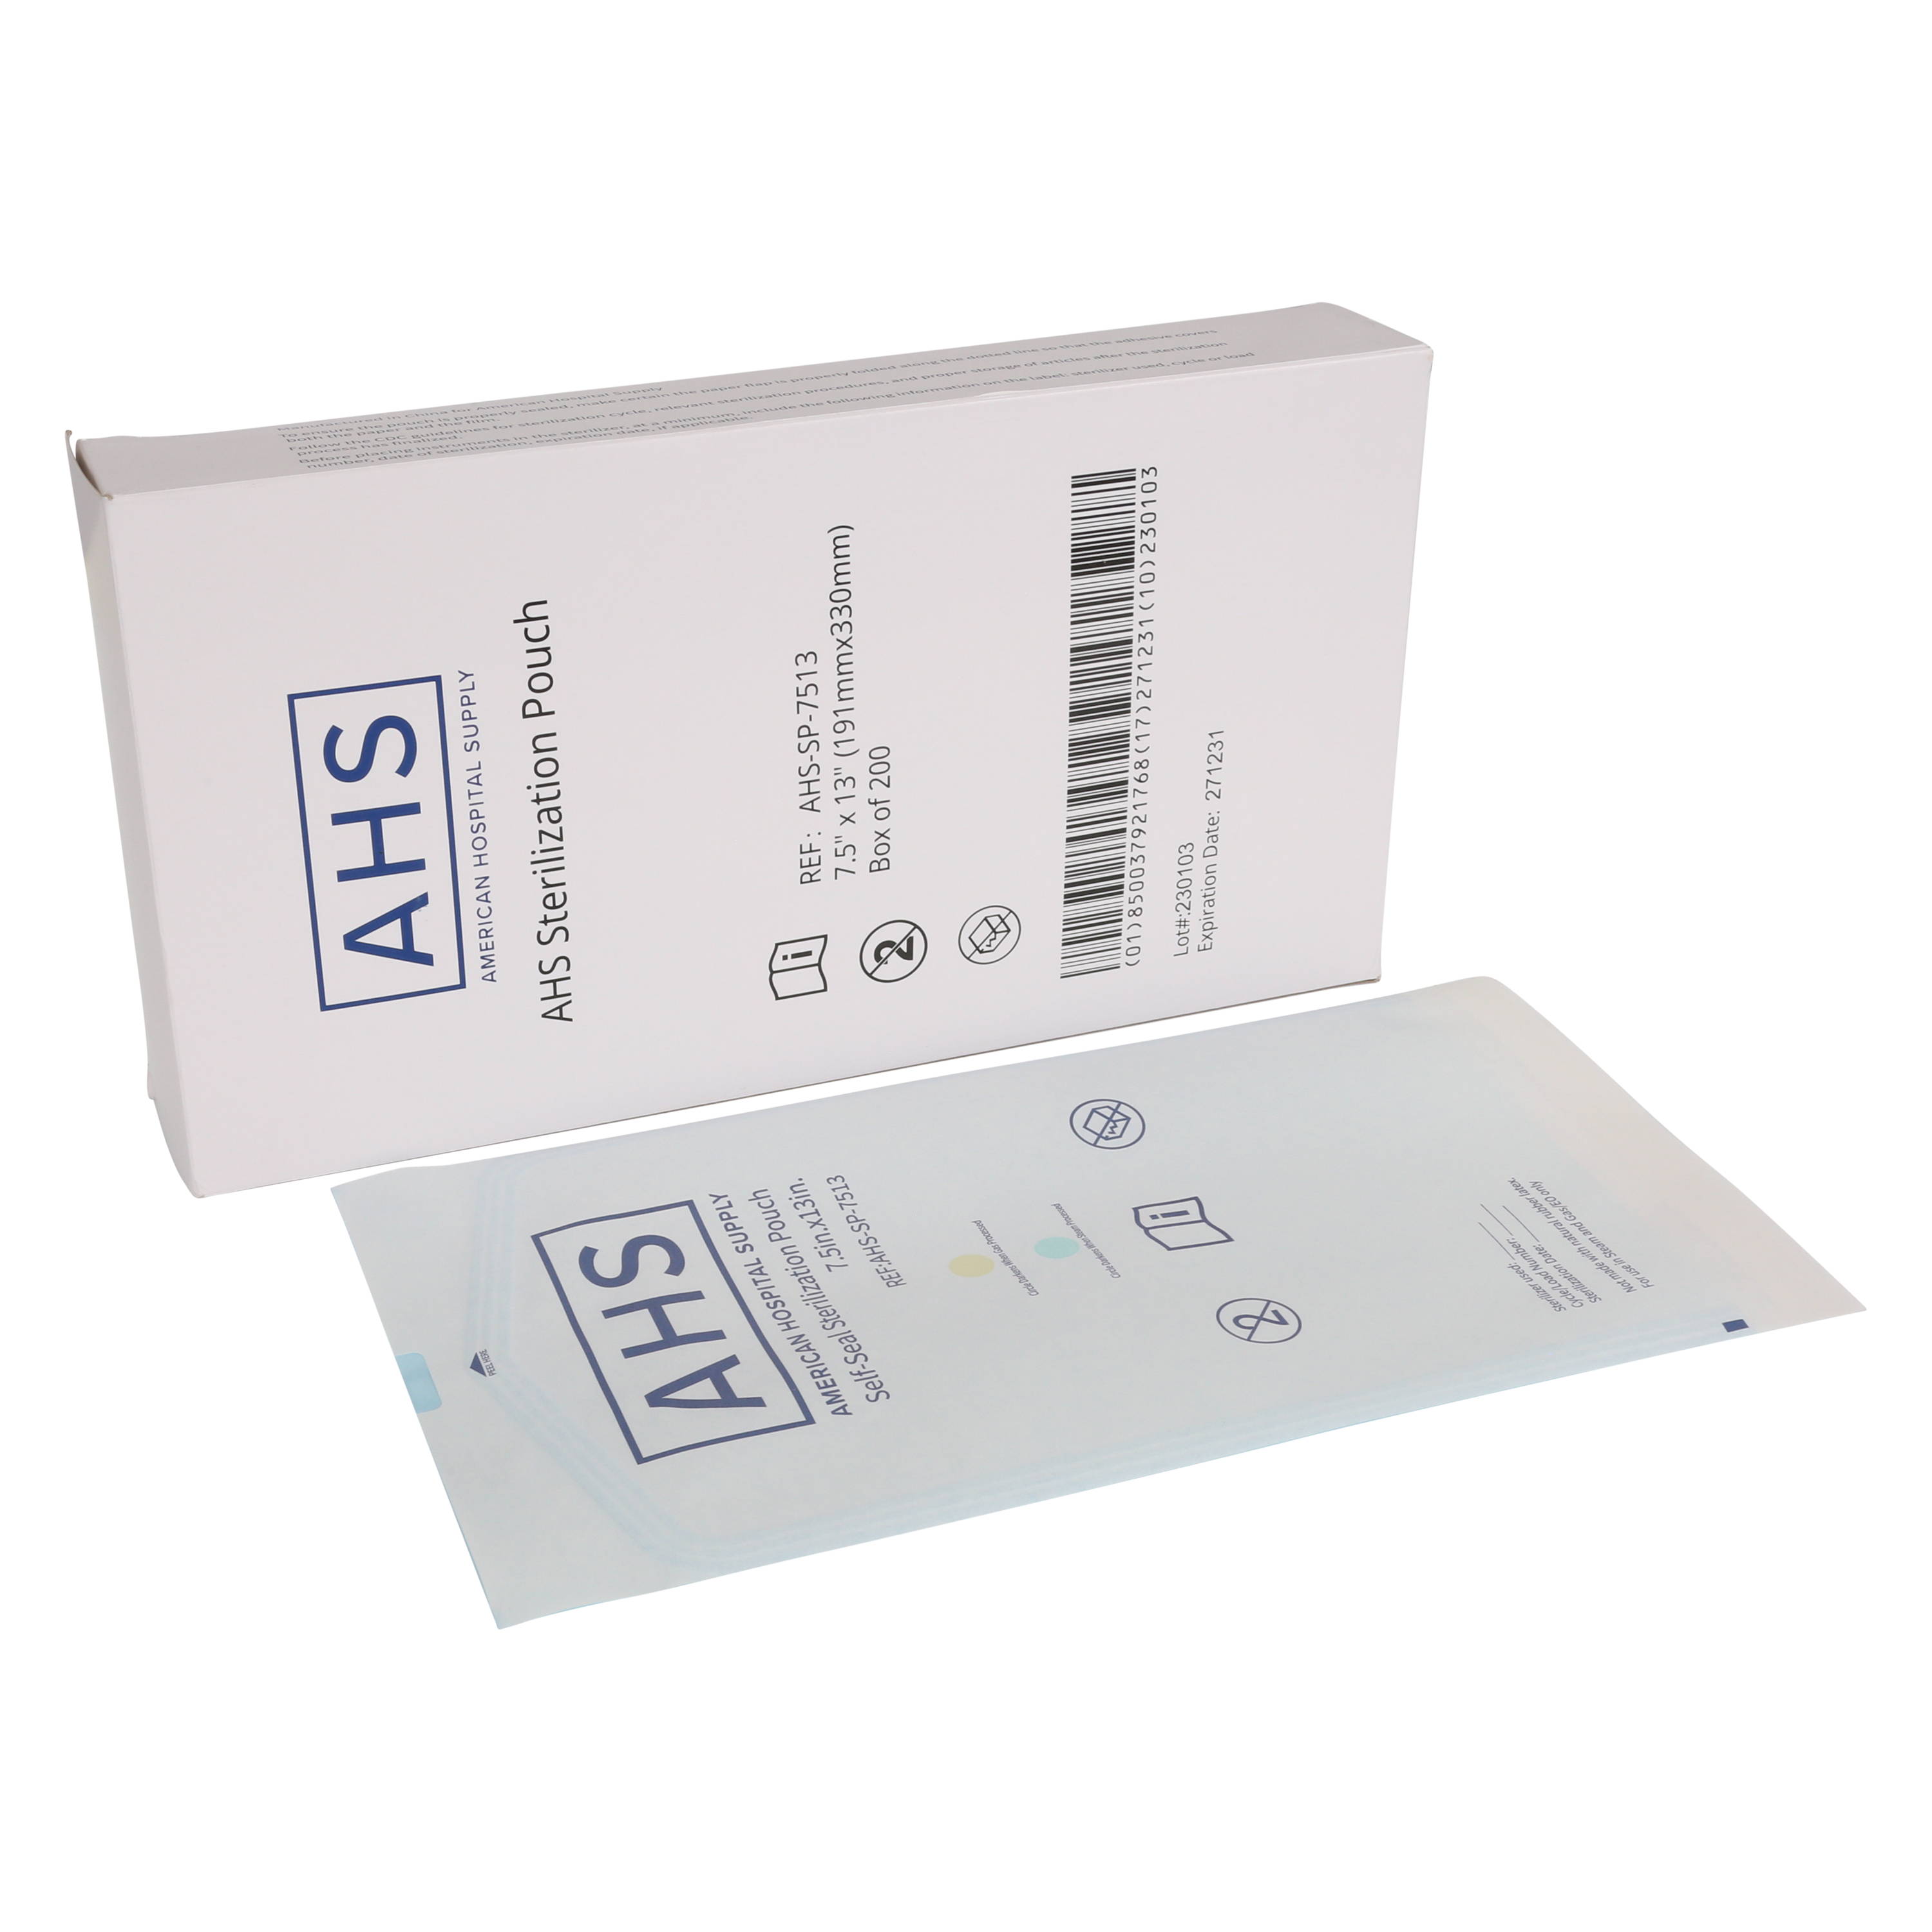 American Hospital Supply Sterilization Pouches for Cleaning Instruments